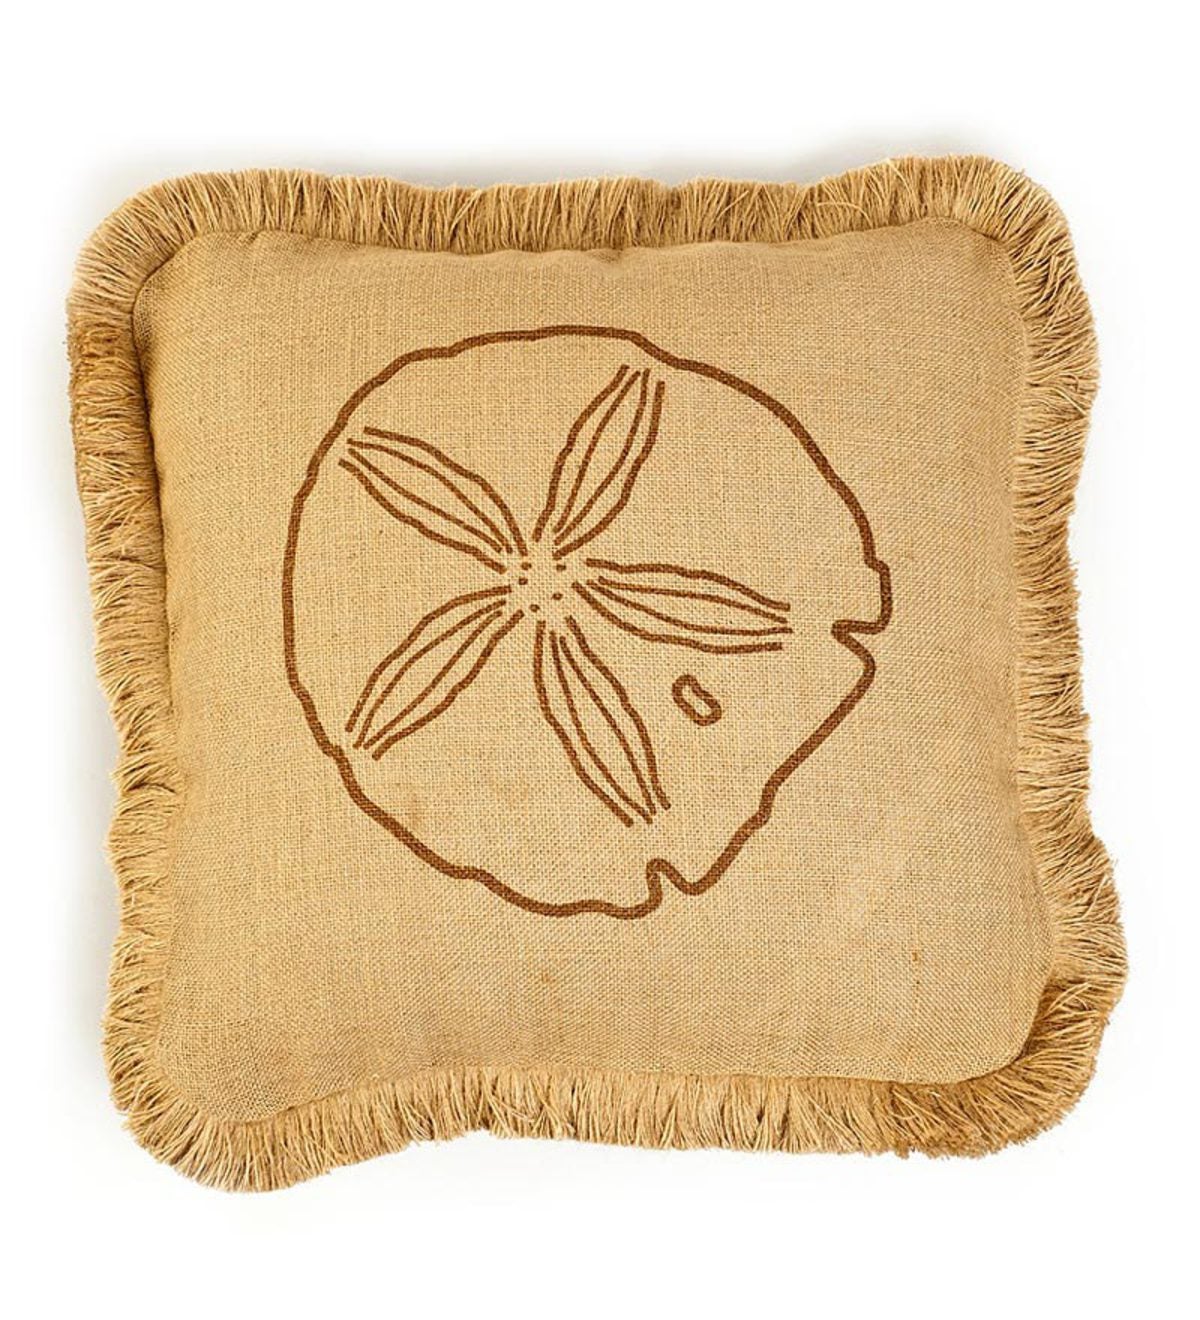 Washed Burlap Sand Dollar Accent Pillow With Fringe